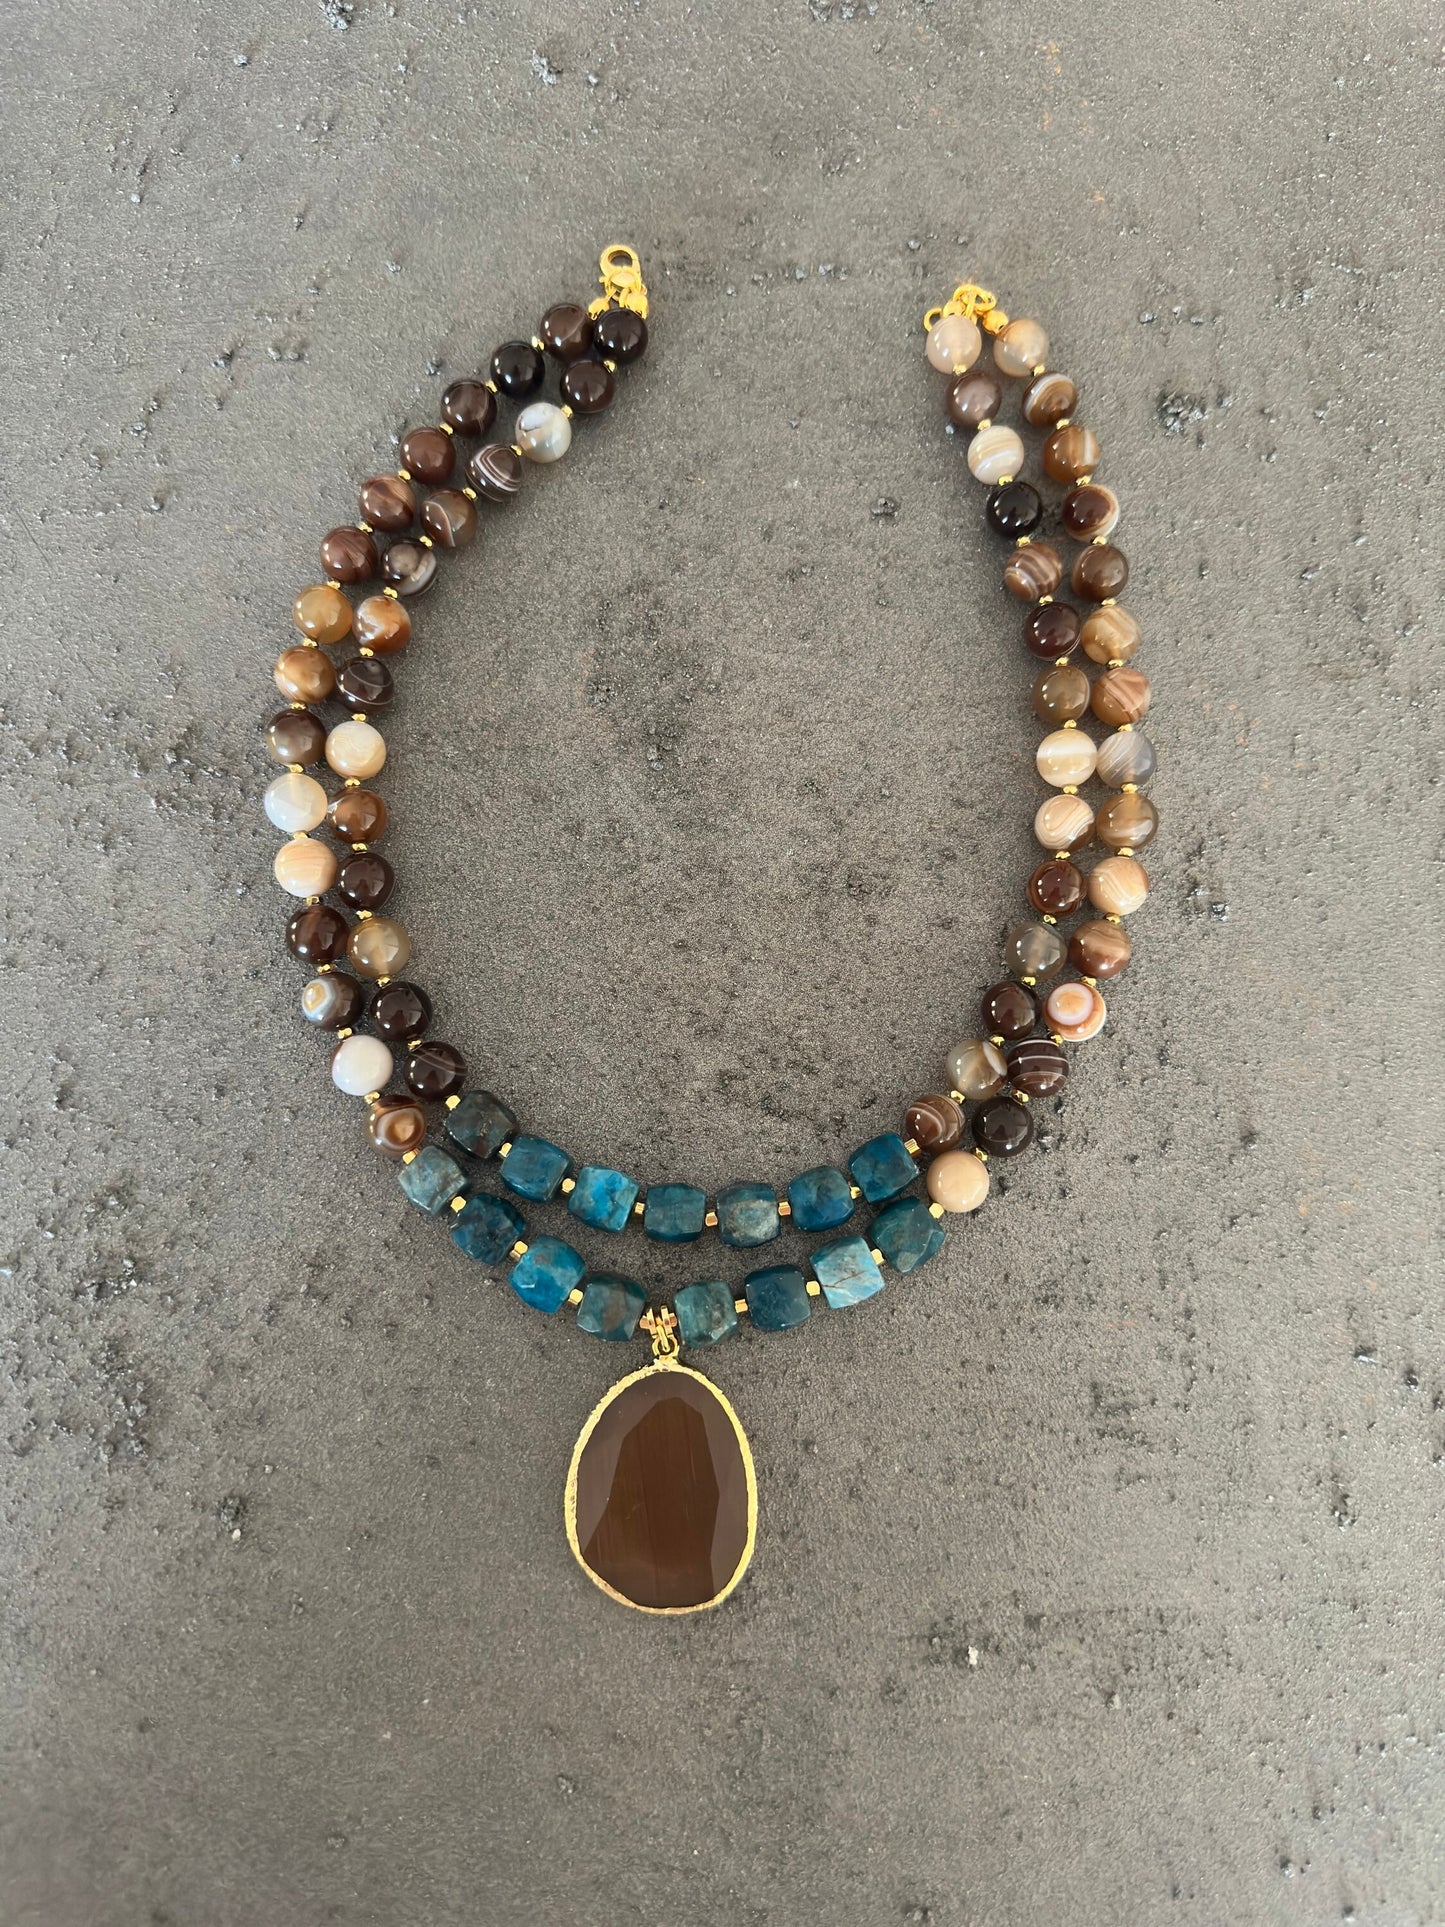 Gemstone Necklace, Beaded Agate and Apatite Jewelry for Women, Handmade Brown Blue Birthday Gift for Women, Unique Design